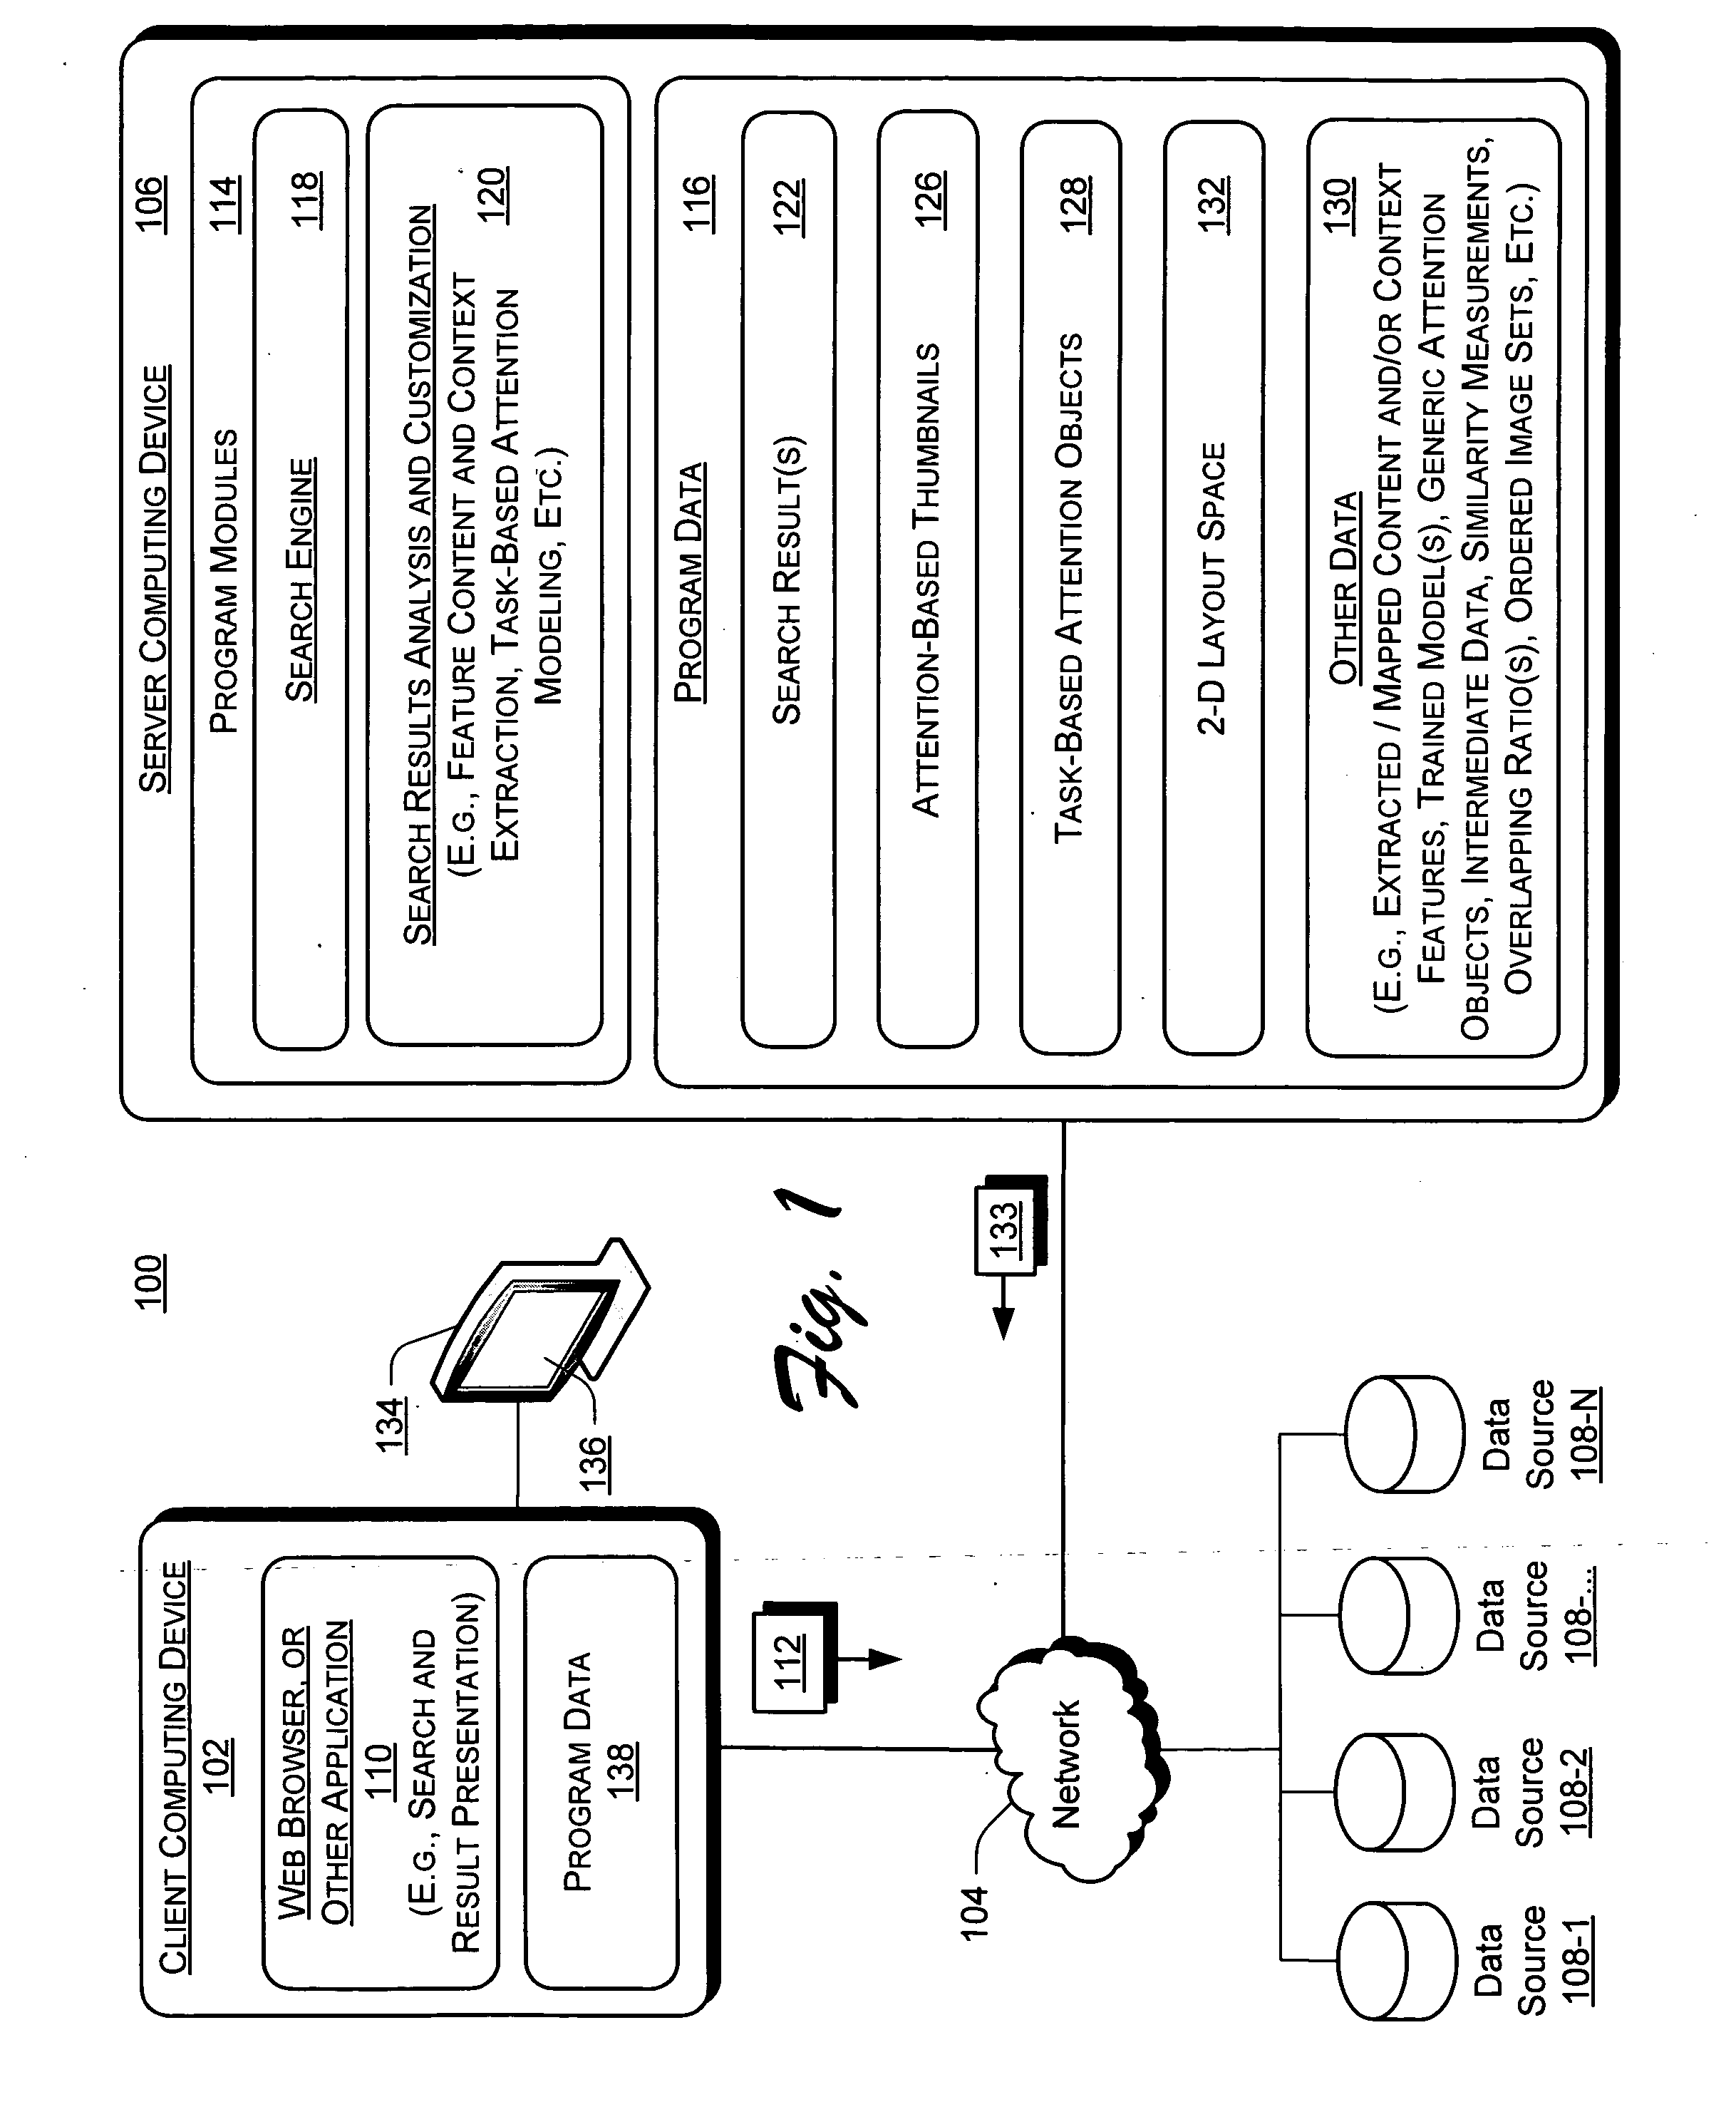 Systems and methods to present web image search results for effective image browsing